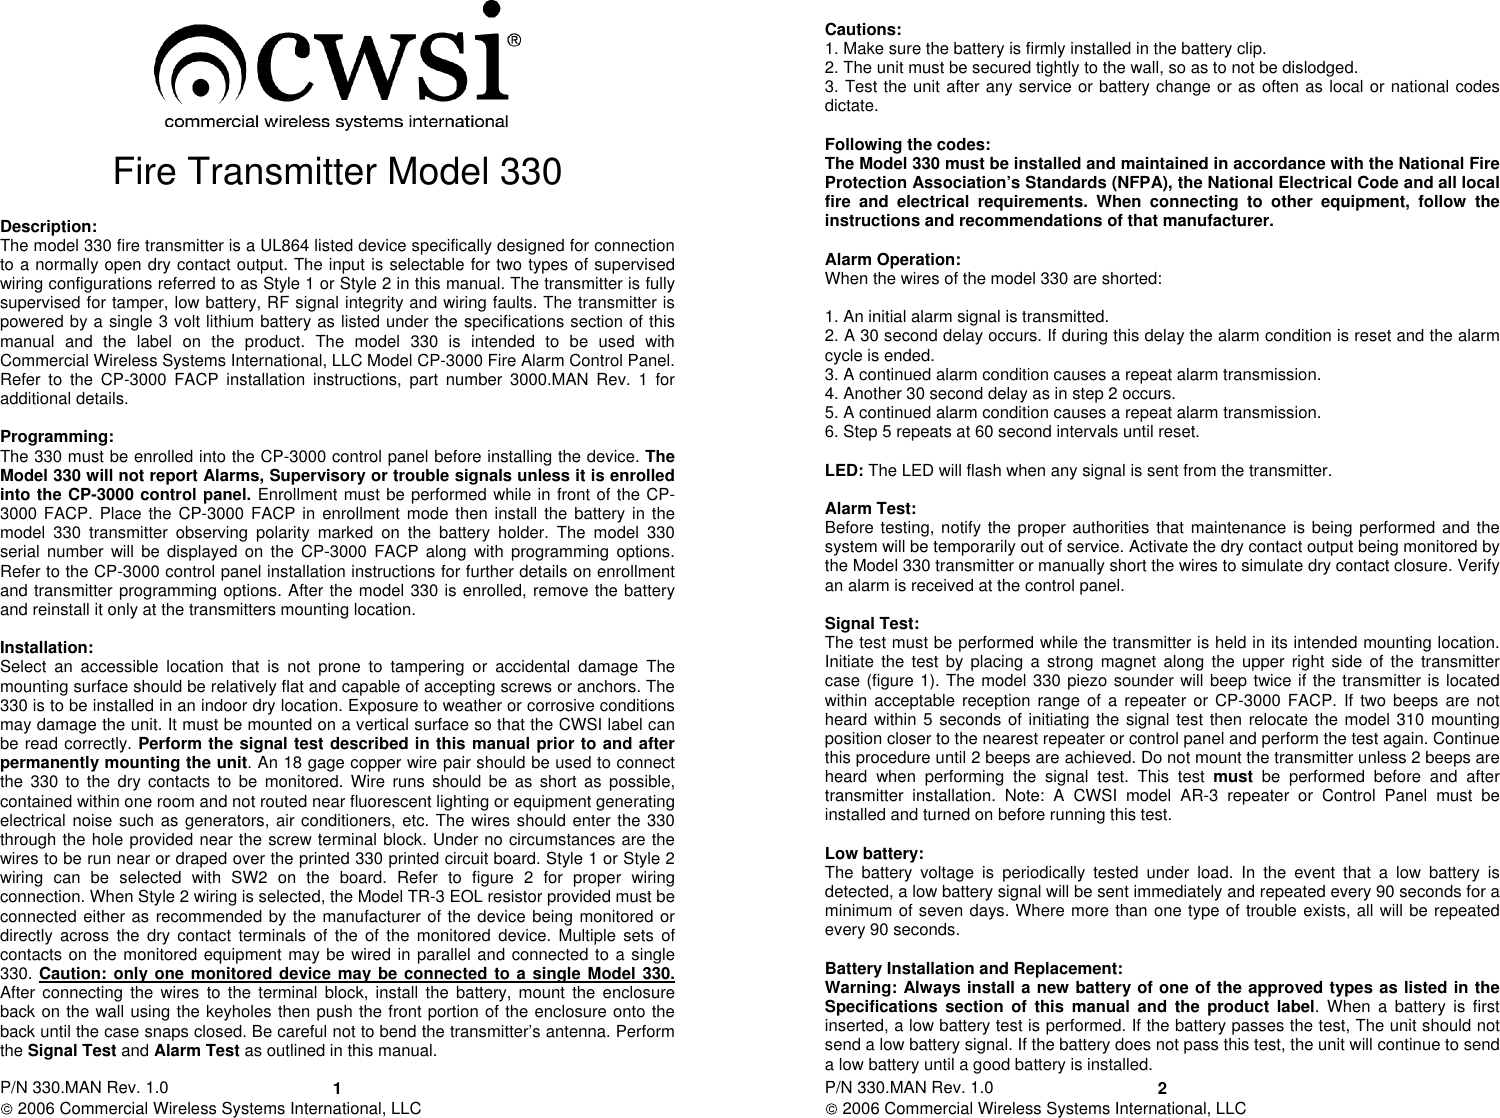 P/N 330.MAN Rev. 1.0   2006 Commercial Wireless Systems International, LLC 1  Fire Transmitter Model 330  Description: The model 330 fire transmitter is a UL864 listed device specifically designed for connection to a normally open dry contact output. The input is selectable for two types of supervised wiring configurations referred to as Style 1 or Style 2 in this manual. The transmitter is fully supervised for tamper, low battery, RF signal integrity and wiring faults. The transmitter is powered by a single 3 volt lithium battery as listed under the specifications section of this manual  and  the  label  on  the  product.  The  model  330  is  intended  to  be  used  with Commercial Wireless Systems International, LLC Model CP-3000 Fire Alarm Control Panel. Refer  to  the  CP-3000  FACP  installation  instructions,  part  number  3000.MAN  Rev.  1  for additional details.  Programming: The 330 must be enrolled into the CP-3000 control panel before installing the device. The Model 330 will not report Alarms, Supervisory or trouble signals unless it is enrolled into the CP-3000 control panel. Enrollment must be performed while in front of the CP-3000 FACP. Place  the  CP-3000 FACP in enrollment  mode then install  the  battery in the model  330  transmitter  observing  polarity  marked  on  the  battery  holder.  The  model  330 serial  number  will  be displayed  on  the  CP-3000  FACP along  with programming  options. Refer to the CP-3000 control panel installation instructions for further details on enrollment and transmitter programming options. After the model 330 is enrolled, remove the battery and reinstall it only at the transmitters mounting location.  Installation: Select  an  accessible  location  that  is  not  prone  to  tampering  or  accidental  damage The mounting surface should be relatively flat and capable of accepting screws or anchors. The 330 is to be installed in an indoor dry location. Exposure to weather or corrosive conditions may damage the unit. It must be mounted on a vertical surface so that the CWSI label can be read correctly. Perform the signal test described in this manual prior to and after permanently mounting the unit. An 18 gage copper wire pair should be used to connect the  330 to  the  dry contacts  to  be  monitored.  Wire  runs  should  be  as  short  as  possible, contained within one room and not routed near fluorescent lighting or equipment generating electrical noise such as  generators, air conditioners, etc. The wires should enter the 330 through the hole provided near the screw terminal block. Under no circumstances are the wires to be run near or draped over the printed 330 printed circuit board. Style 1 or Style 2 wiring  can  be  selected  with  SW2  on  the  board.  Refer  to  figure  2  for  proper wiring connection. When Style 2 wiring is selected, the Model TR-3 EOL resistor provided must be connected either as recommended by the manufacturer of the device being monitored or directly  across  the dry  contact  terminals  of  the  of  the  monitored  device.  Multiple  sets  of contacts on the monitored equipment may be wired in parallel and connected to a single 330. Caution: only one monitored device may be connected to a single Model 330.  After  connecting  the wires  to the  terminal block,  install  the battery, mount  the  enclosure back on the wall using the keyholes then push the front portion of the enclosure onto the back until the case snaps closed. Be careful not to bend the transmitter’s antenna. Perform the Signal Test and Alarm Test as outlined in this manual.  P/N 330.MAN Rev. 1.0   2006 Commercial Wireless Systems International, LLC 2 Cautions: 1. Make sure the battery is firmly installed in the battery clip. 2. The unit must be secured tightly to the wall, so as to not be dislodged. 3. Test the unit after any service or battery change or as often as local or national codes dictate.   Following the codes: The Model 330 must be installed and maintained in accordance with the National Fire Protection Association’s Standards (NFPA), the National Electrical Code and all local fire  and  electrical  requirements.  When  connecting  to other equipment,  follow  the instructions and recommendations of that manufacturer.  Alarm Operation: When the wires of the model 330 are shorted:  1. An initial alarm signal is transmitted. 2. A 30 second delay occurs. If during this delay the alarm condition is reset and the alarm cycle is ended. 3. A continued alarm condition causes a repeat alarm transmission. 4. Another 30 second delay as in step 2 occurs. 5. A continued alarm condition causes a repeat alarm transmission. 6. Step 5 repeats at 60 second intervals until reset.  LED: The LED will flash when any signal is sent from the transmitter.  Alarm Test: Before testing, notify the proper authorities that maintenance is being performed  and  the system will be temporarily out of service. Activate the dry contact output being monitored by the Model 330 transmitter or manually short the wires to simulate dry contact closure. Verify an alarm is received at the control panel.  Signal Test: The test must be performed while the transmitter is held in its intended mounting location. Initiate  the test  by placing  a strong  magnet along  the  upper  right  side of  the transmitter case (figure 1). The model 330 piezo sounder will beep twice if the transmitter is located within acceptable  reception range of  a  repeater or CP-3000 FACP. If two beeps  are not heard within 5 seconds of initiating the signal test then relocate the model 310 mounting position closer to the nearest repeater or control panel and perform the test again. Continue this procedure until 2 beeps are achieved. Do not mount the transmitter unless 2 beeps are heard  when  performing  the  signal  test.  This  test must  be  performed  before  and  after transmitter  installation.  Note:  A  CWSI  model  AR-3 repeater  or  Control  Panel  must  be installed and turned on before running this test.             Low battery: The  battery  voltage  is  periodically  tested  under  load.  In  the  event  that  a  low  battery  is detected, a low battery signal will be sent immediately and repeated every 90 seconds for a minimum of seven days. Where more than one type of trouble exists, all will be repeated every 90 seconds.   Battery Installation and Replacement: Warning: Always install a new battery of one of the approved types as listed in the Specifications  section  of  this  manual  and  the  product  label. When  a  battery  is  first inserted, a low battery test is performed. If the battery passes the test, The unit should not send a low battery signal. If the battery does not pass this test, the unit will continue to send a low battery until a good battery is installed. 